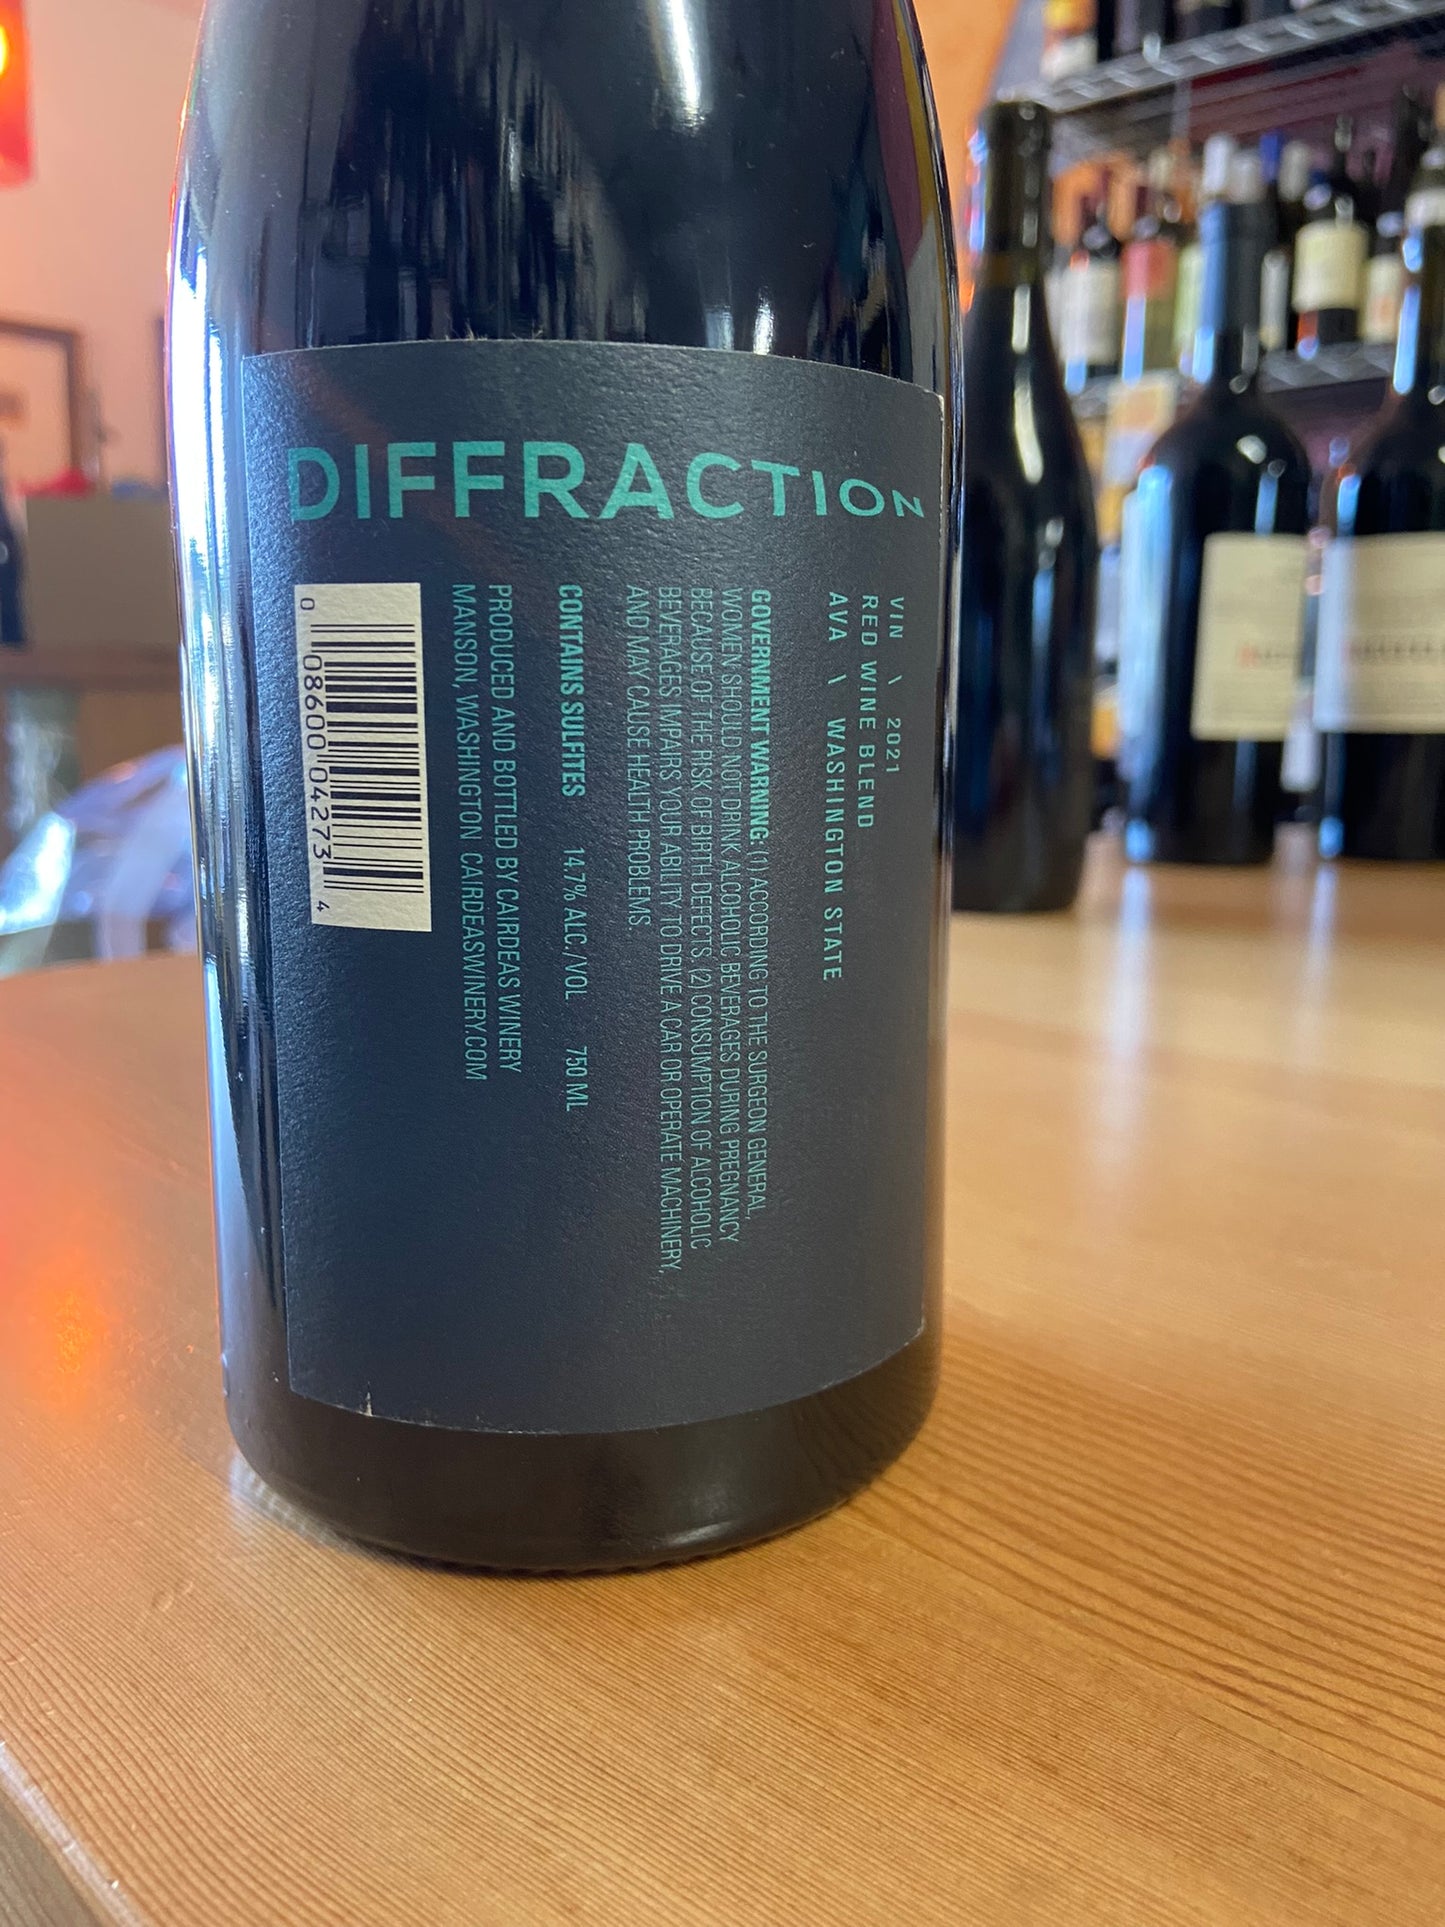 CAIRDEAS 2020 Red Blend 'Diffraction' (Yakima Valley, WA)